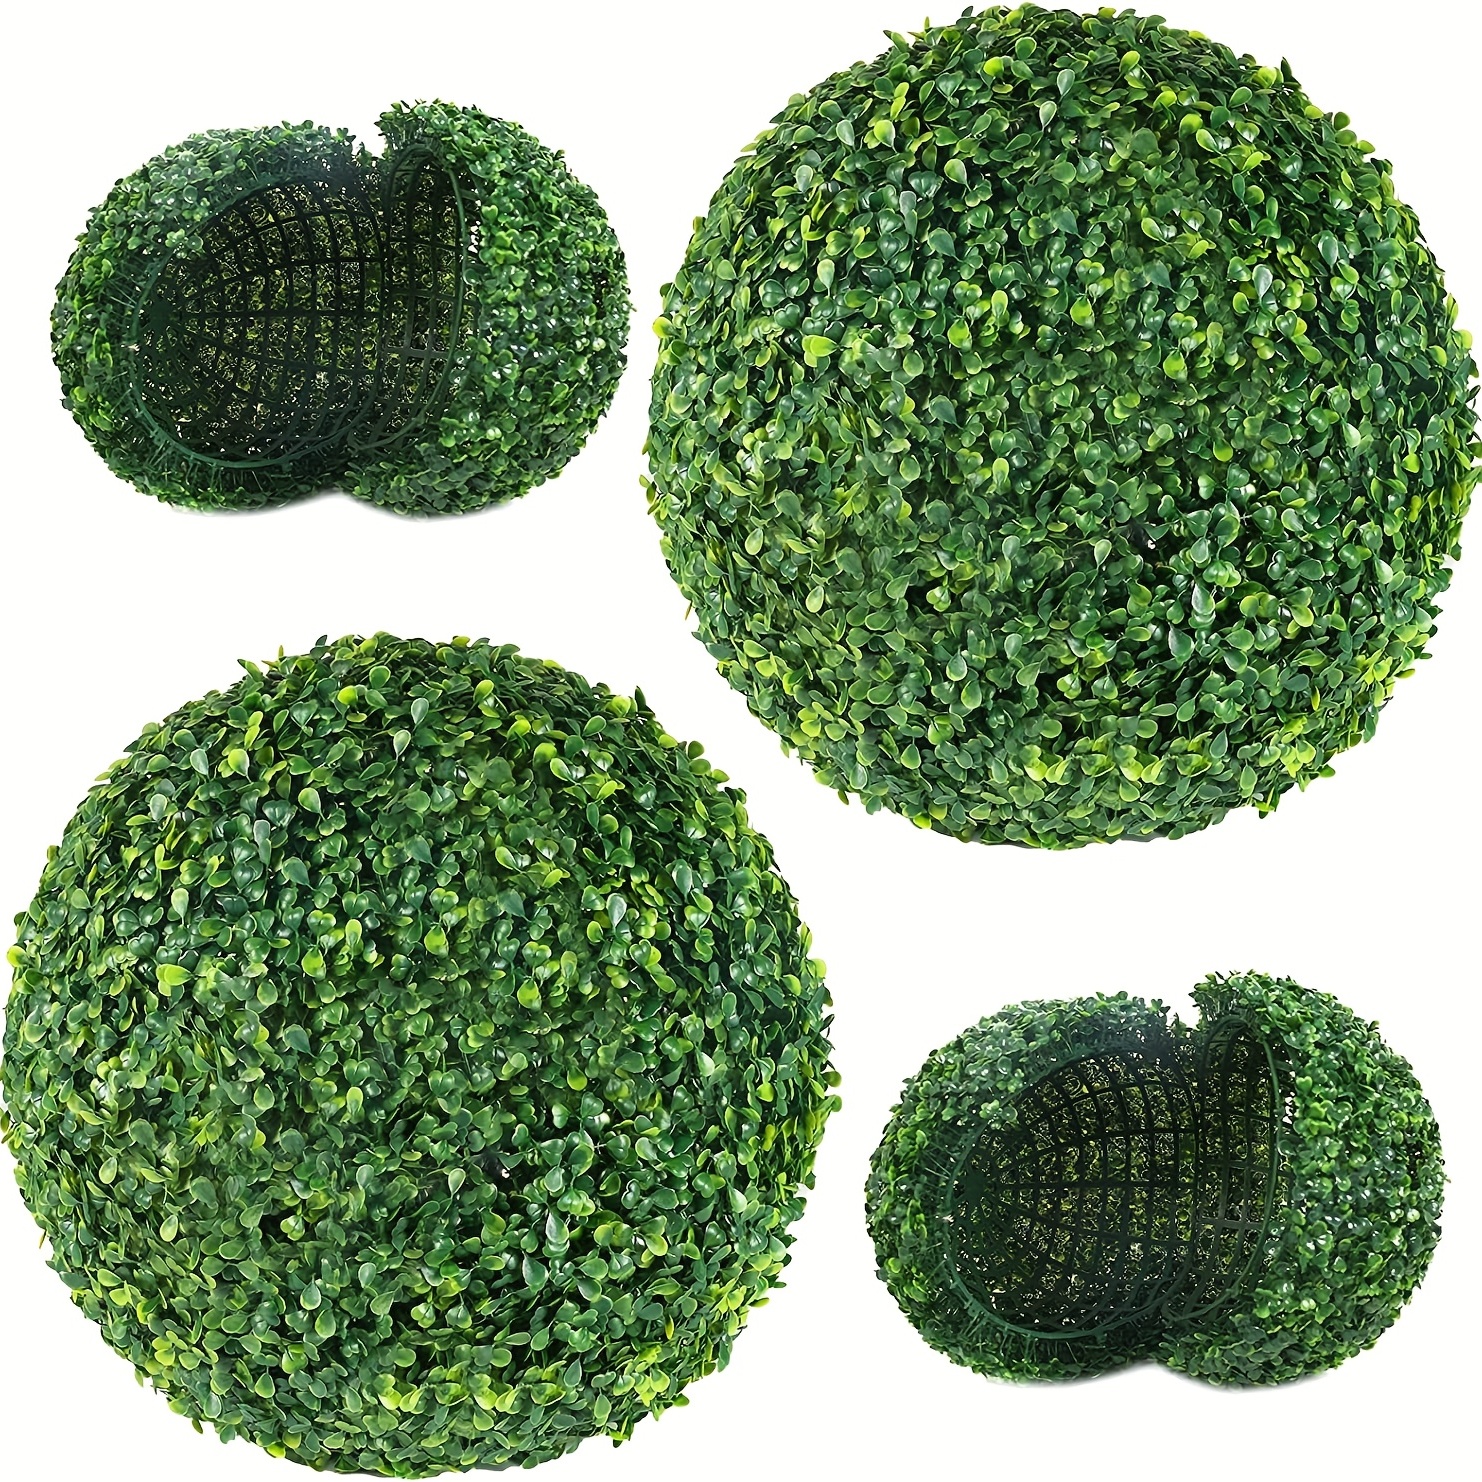 4 Pcs 14 inch Artificial Plant Topiary Balls Outdoor Round Boxwood Balls Large Garden Spheres Faux Decorative Greenery Balls